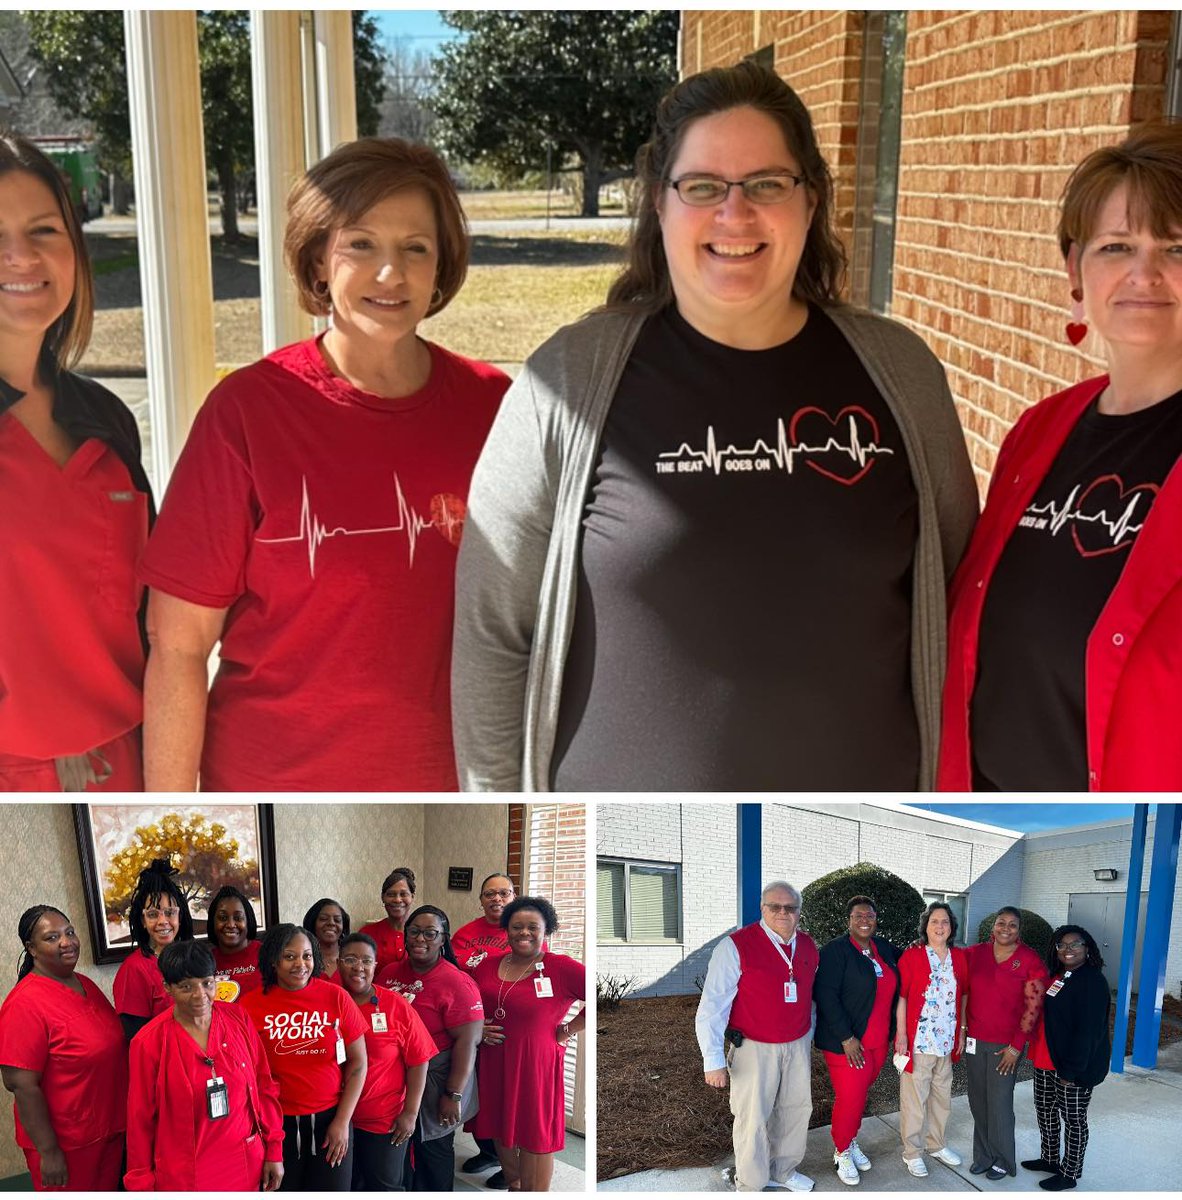 Look who is wearing red for Women's Heart Health!   #NationalWearRedDay #WearRedDay #WomenHeartHealth #dayofred #HeartHealthMonth #RememberOurHearts